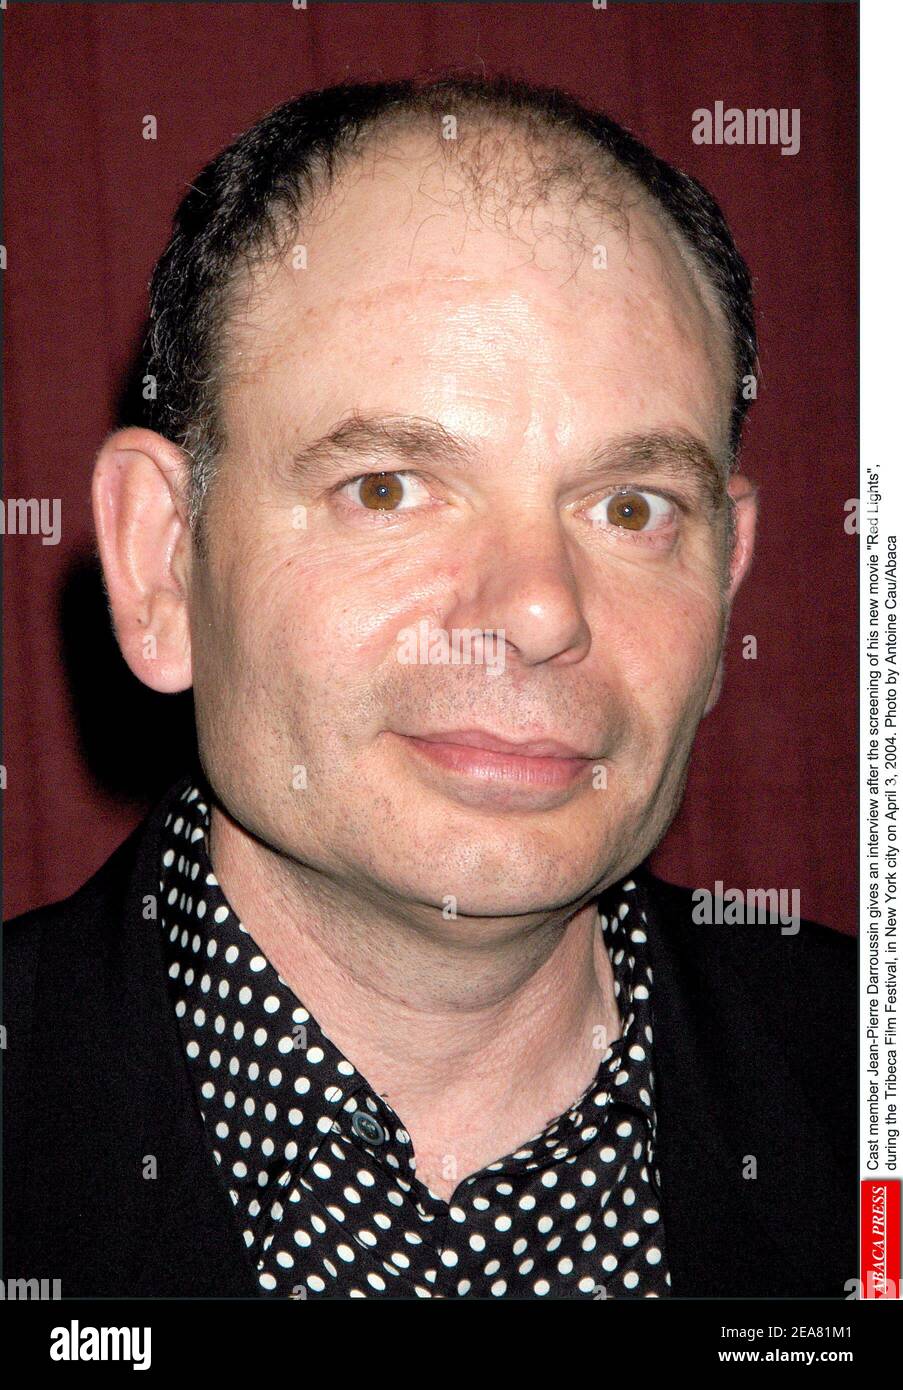 Cast member Jean-Pierre Darroussin gives an interview after the screening of his new movie Red Lights, during the Tribeca Film Festival, in New York city on April 3, 2004. Photo by Antoine Cau/Abaca Stock Photo